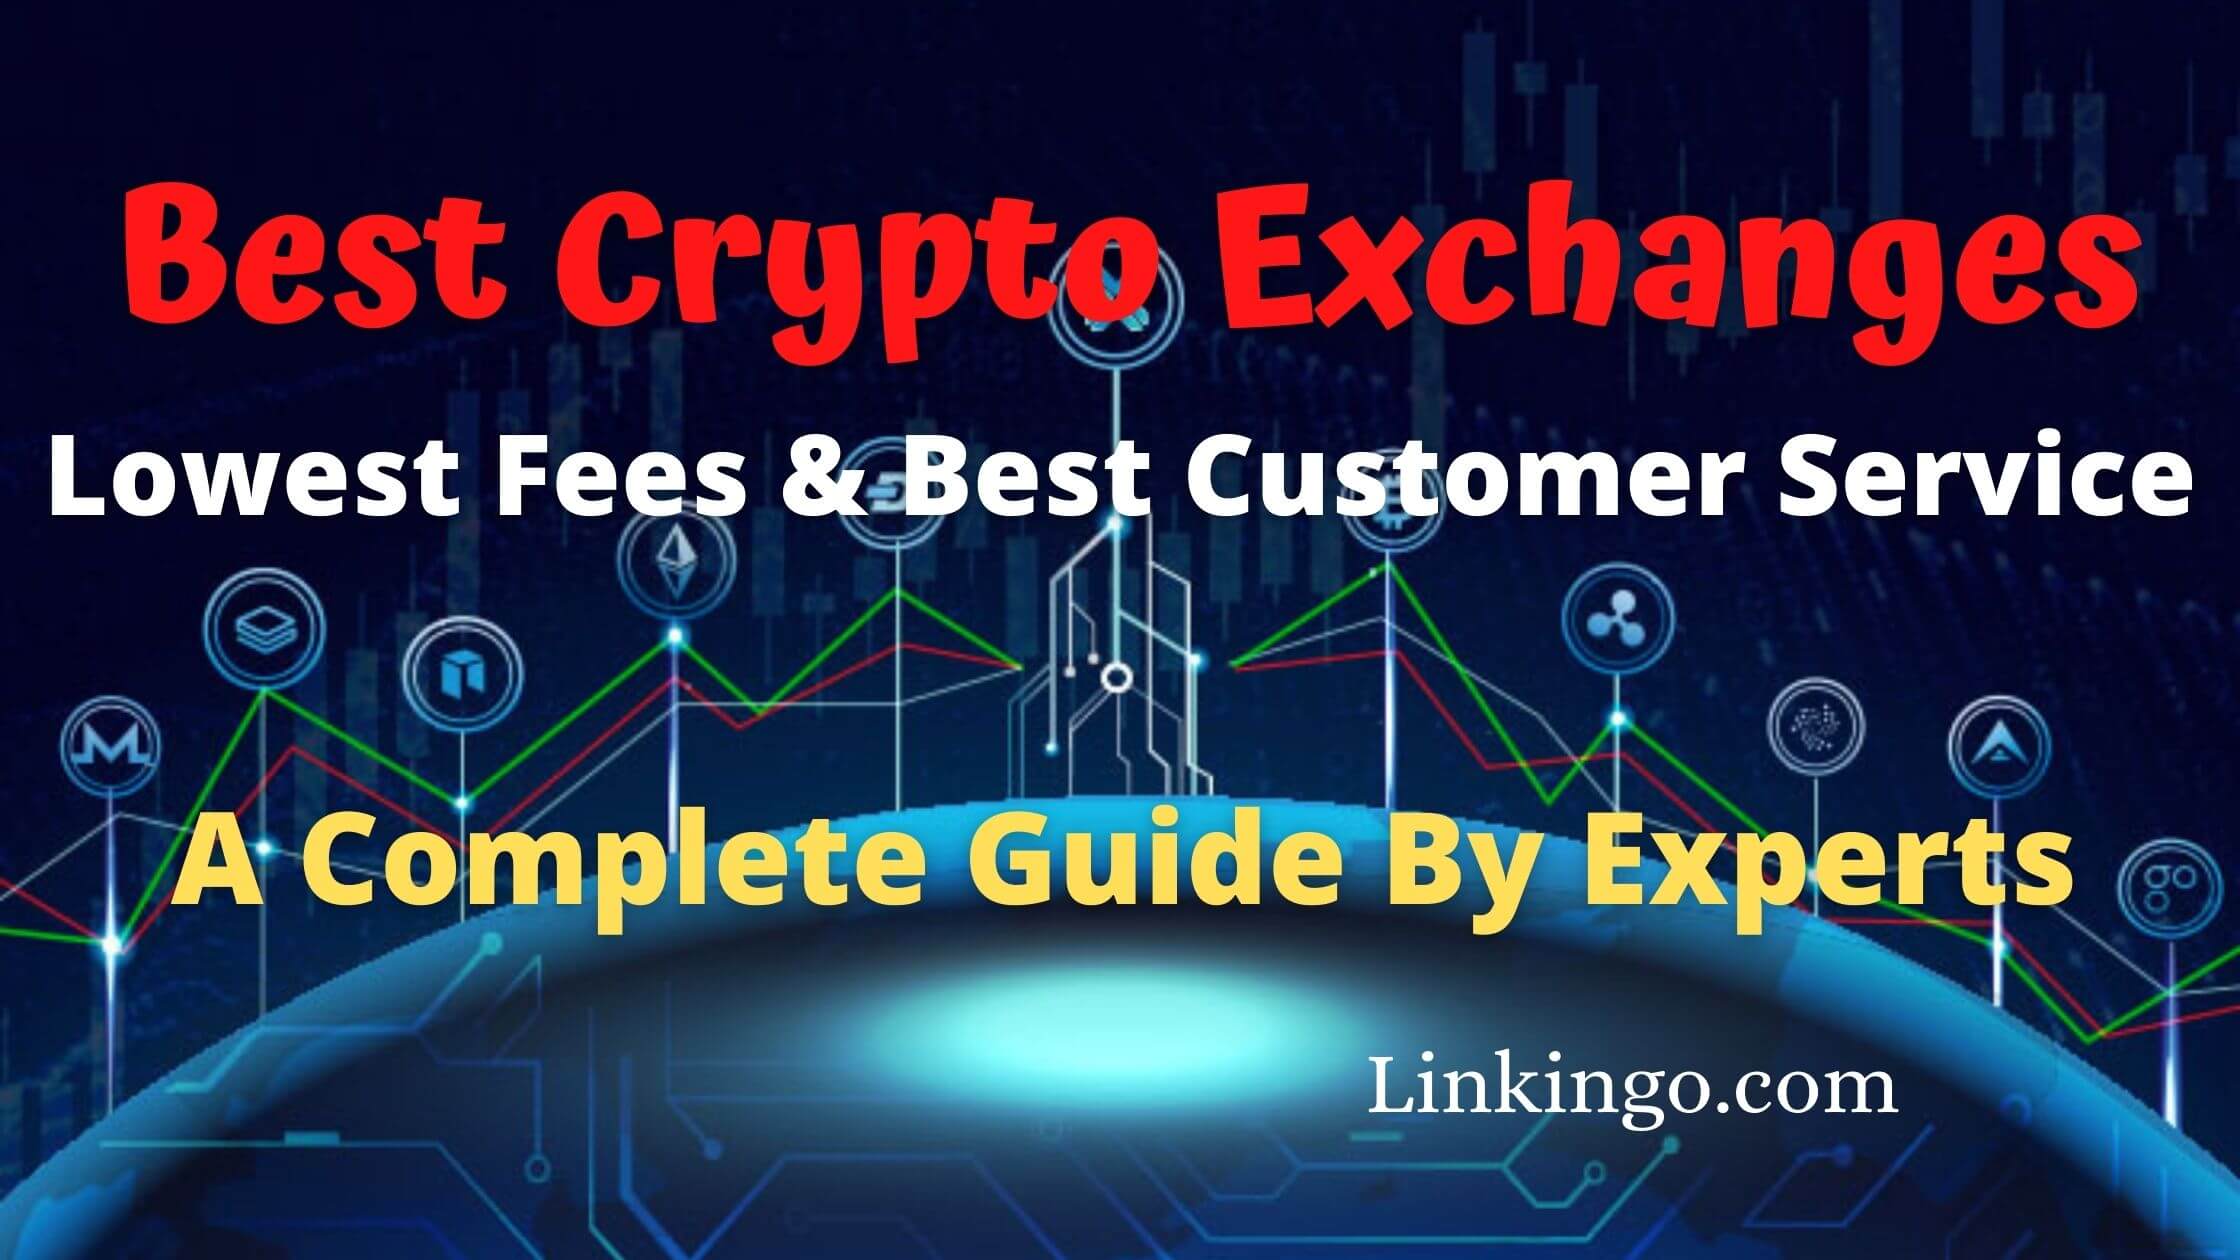 exchange that offer free crypto